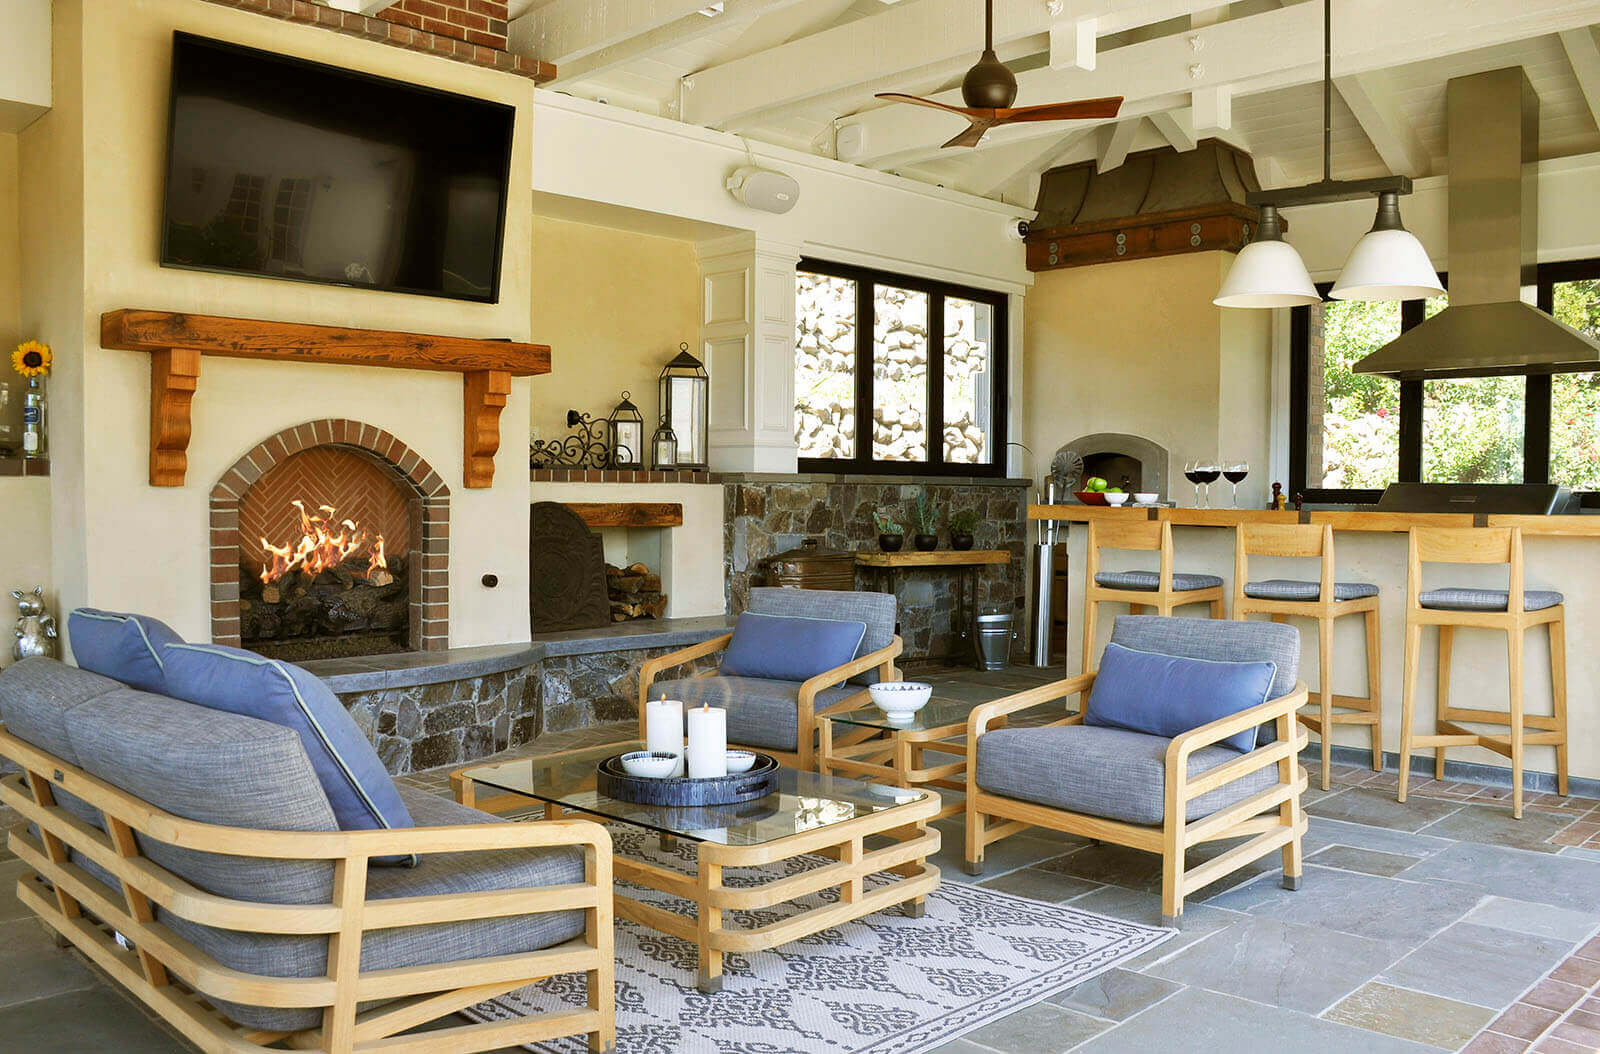 Transitional cabana lounge area with wood accented hearth, bar and matching furniture